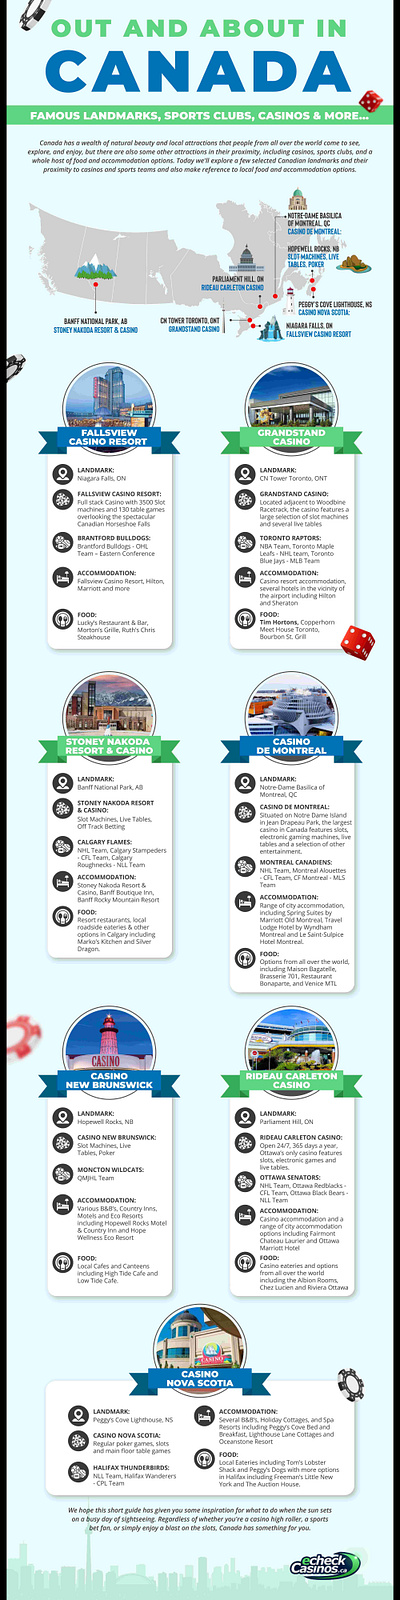 eCheckCasinos.ca’s Infographic Exploring Canada's Must-See Sites out and about in canada